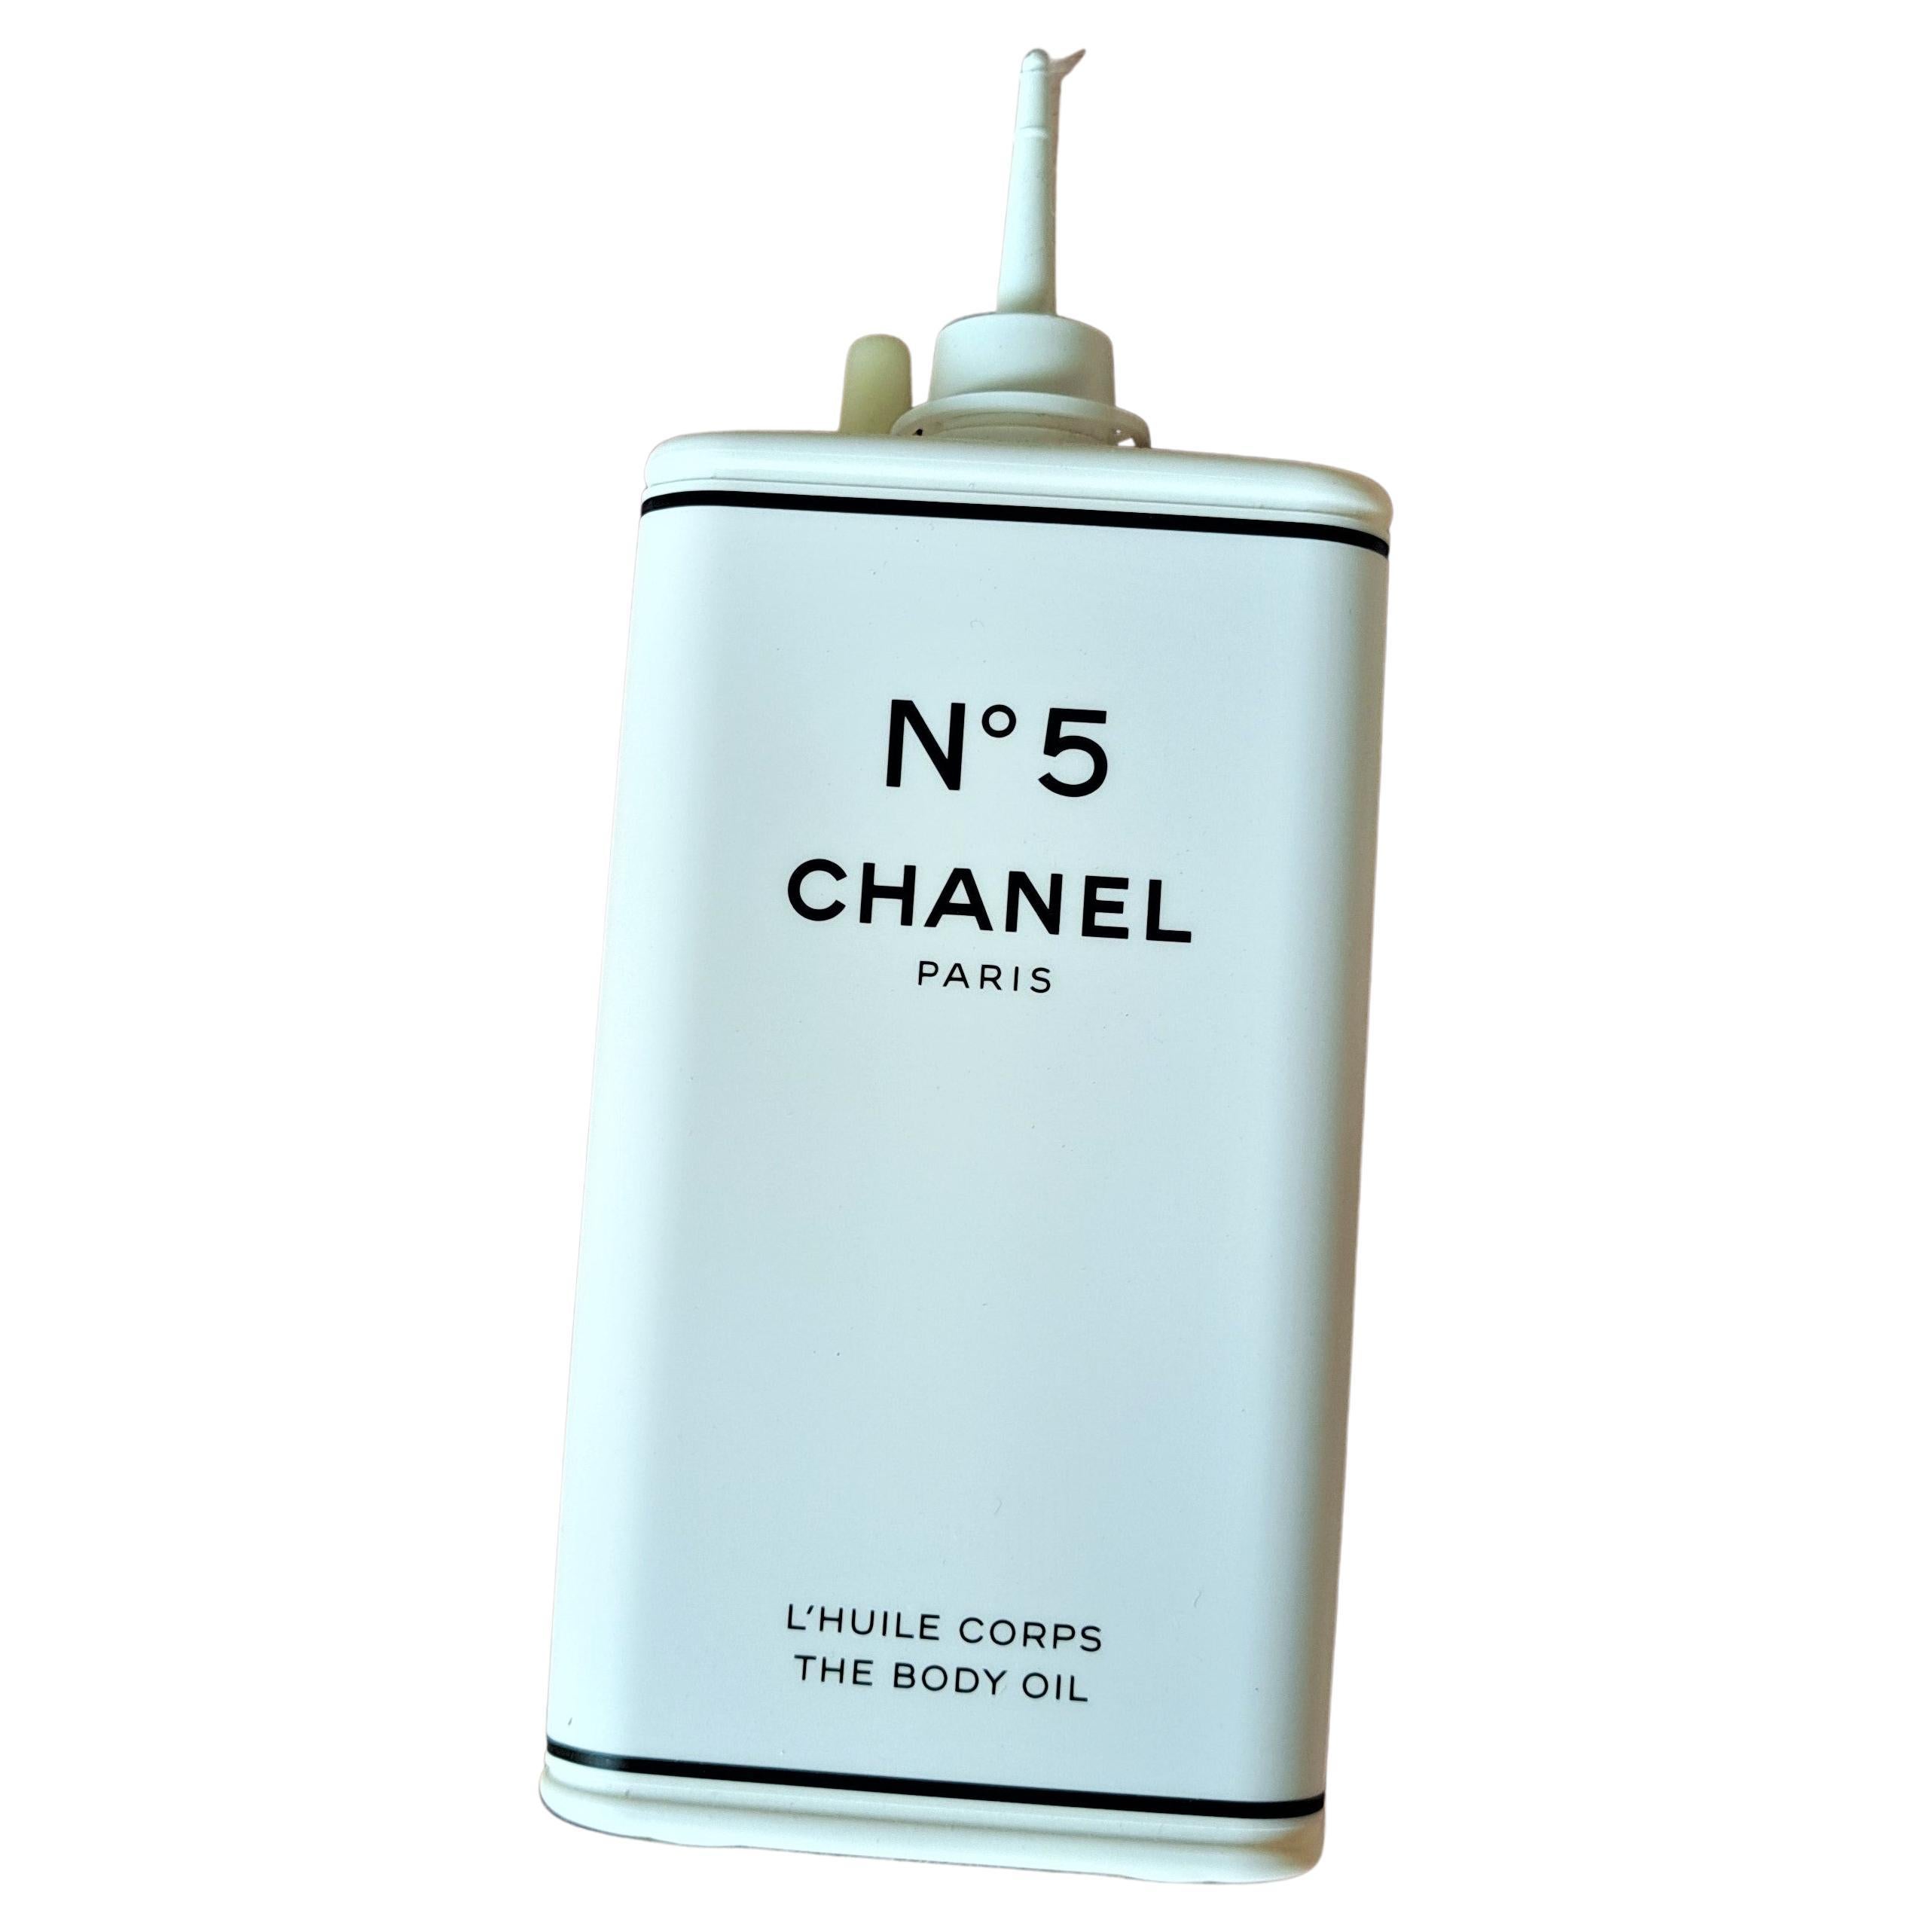 Chanel N°5 Factory Collection Limited Edition The Body Oil and